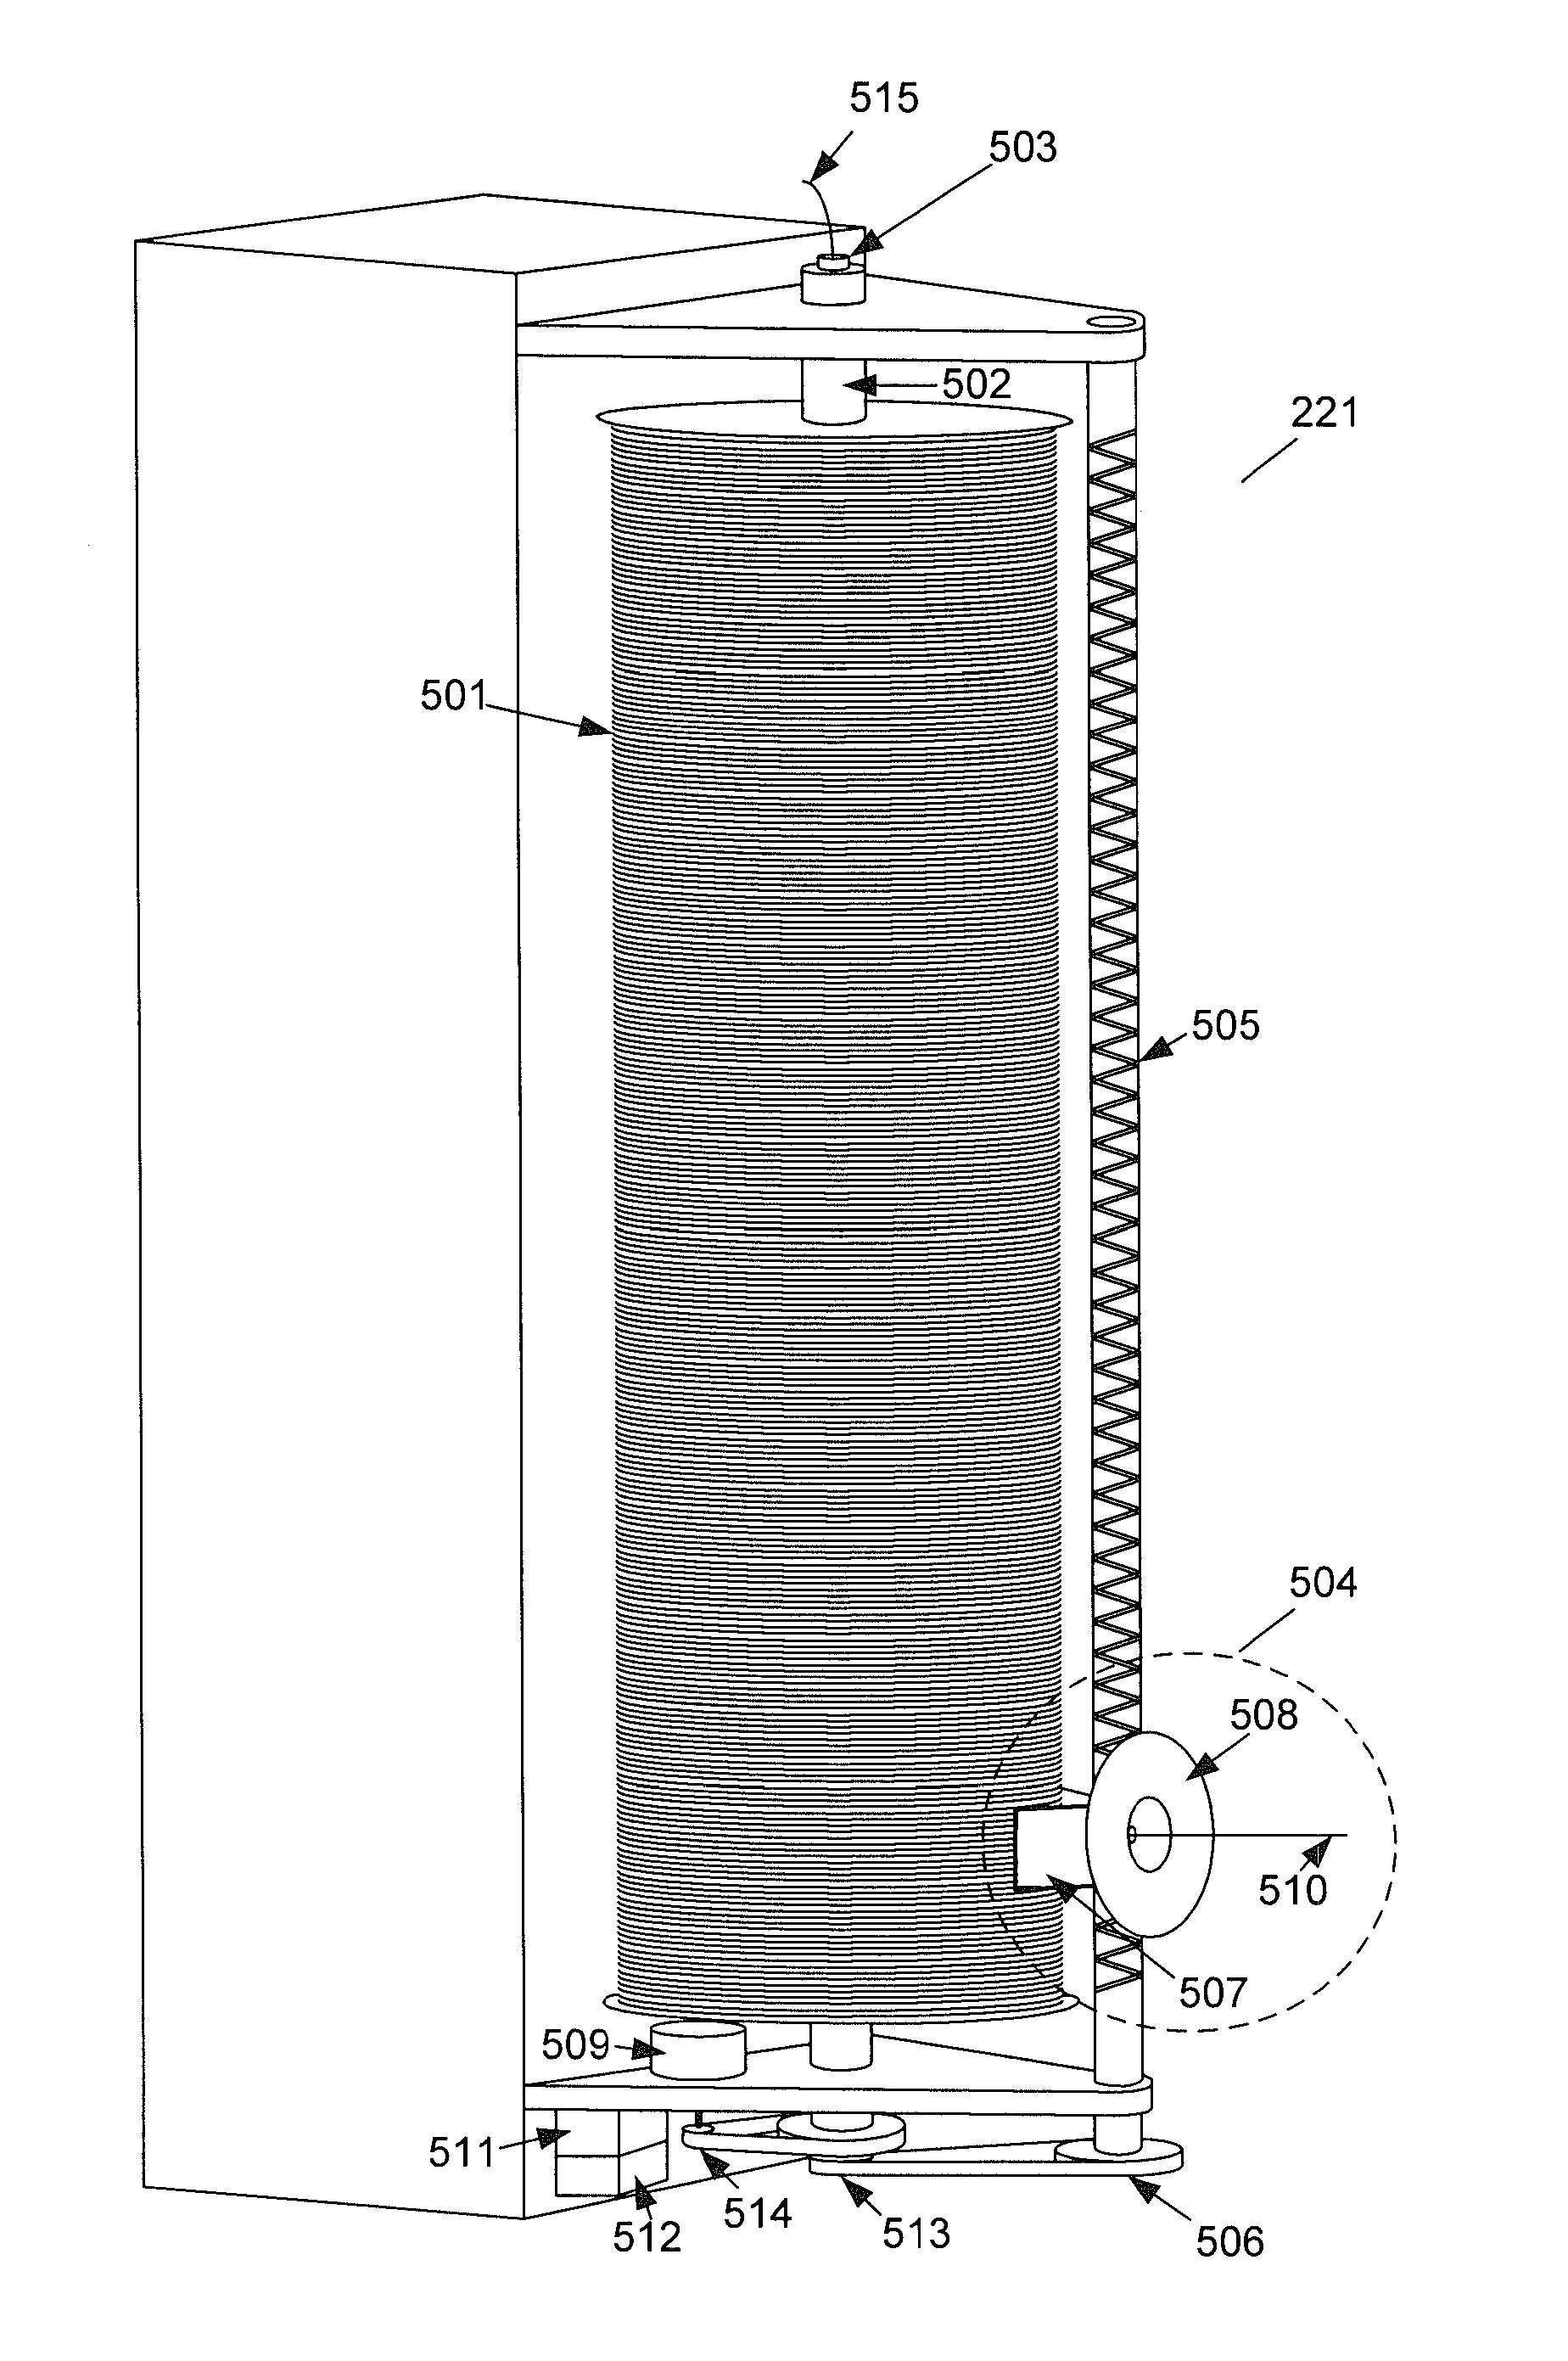 Internal winch for self payout and re-wind of a small diameter tether for underwater remotely operated vehicle